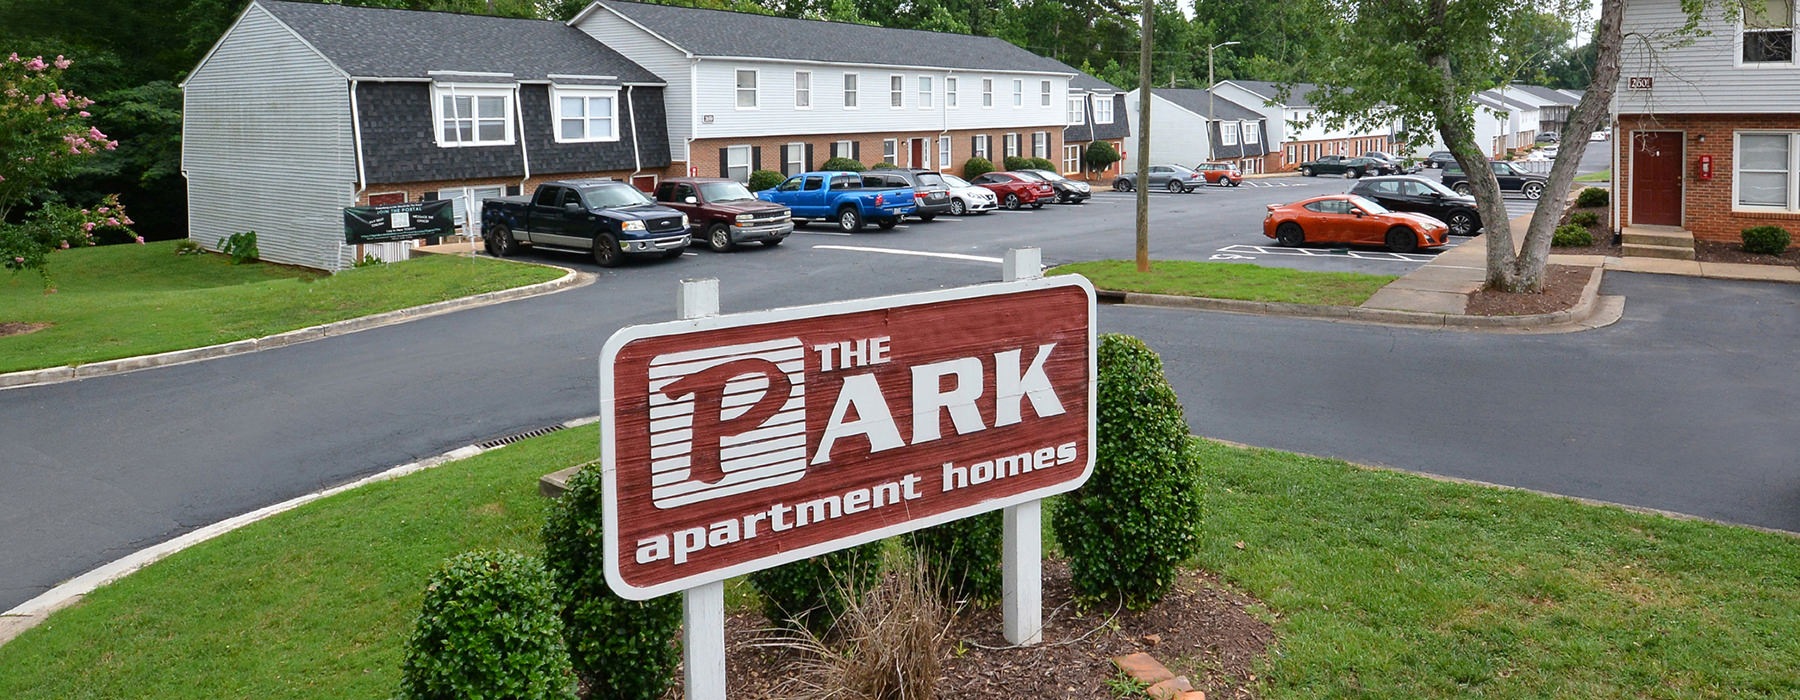 The Park Apartments sign